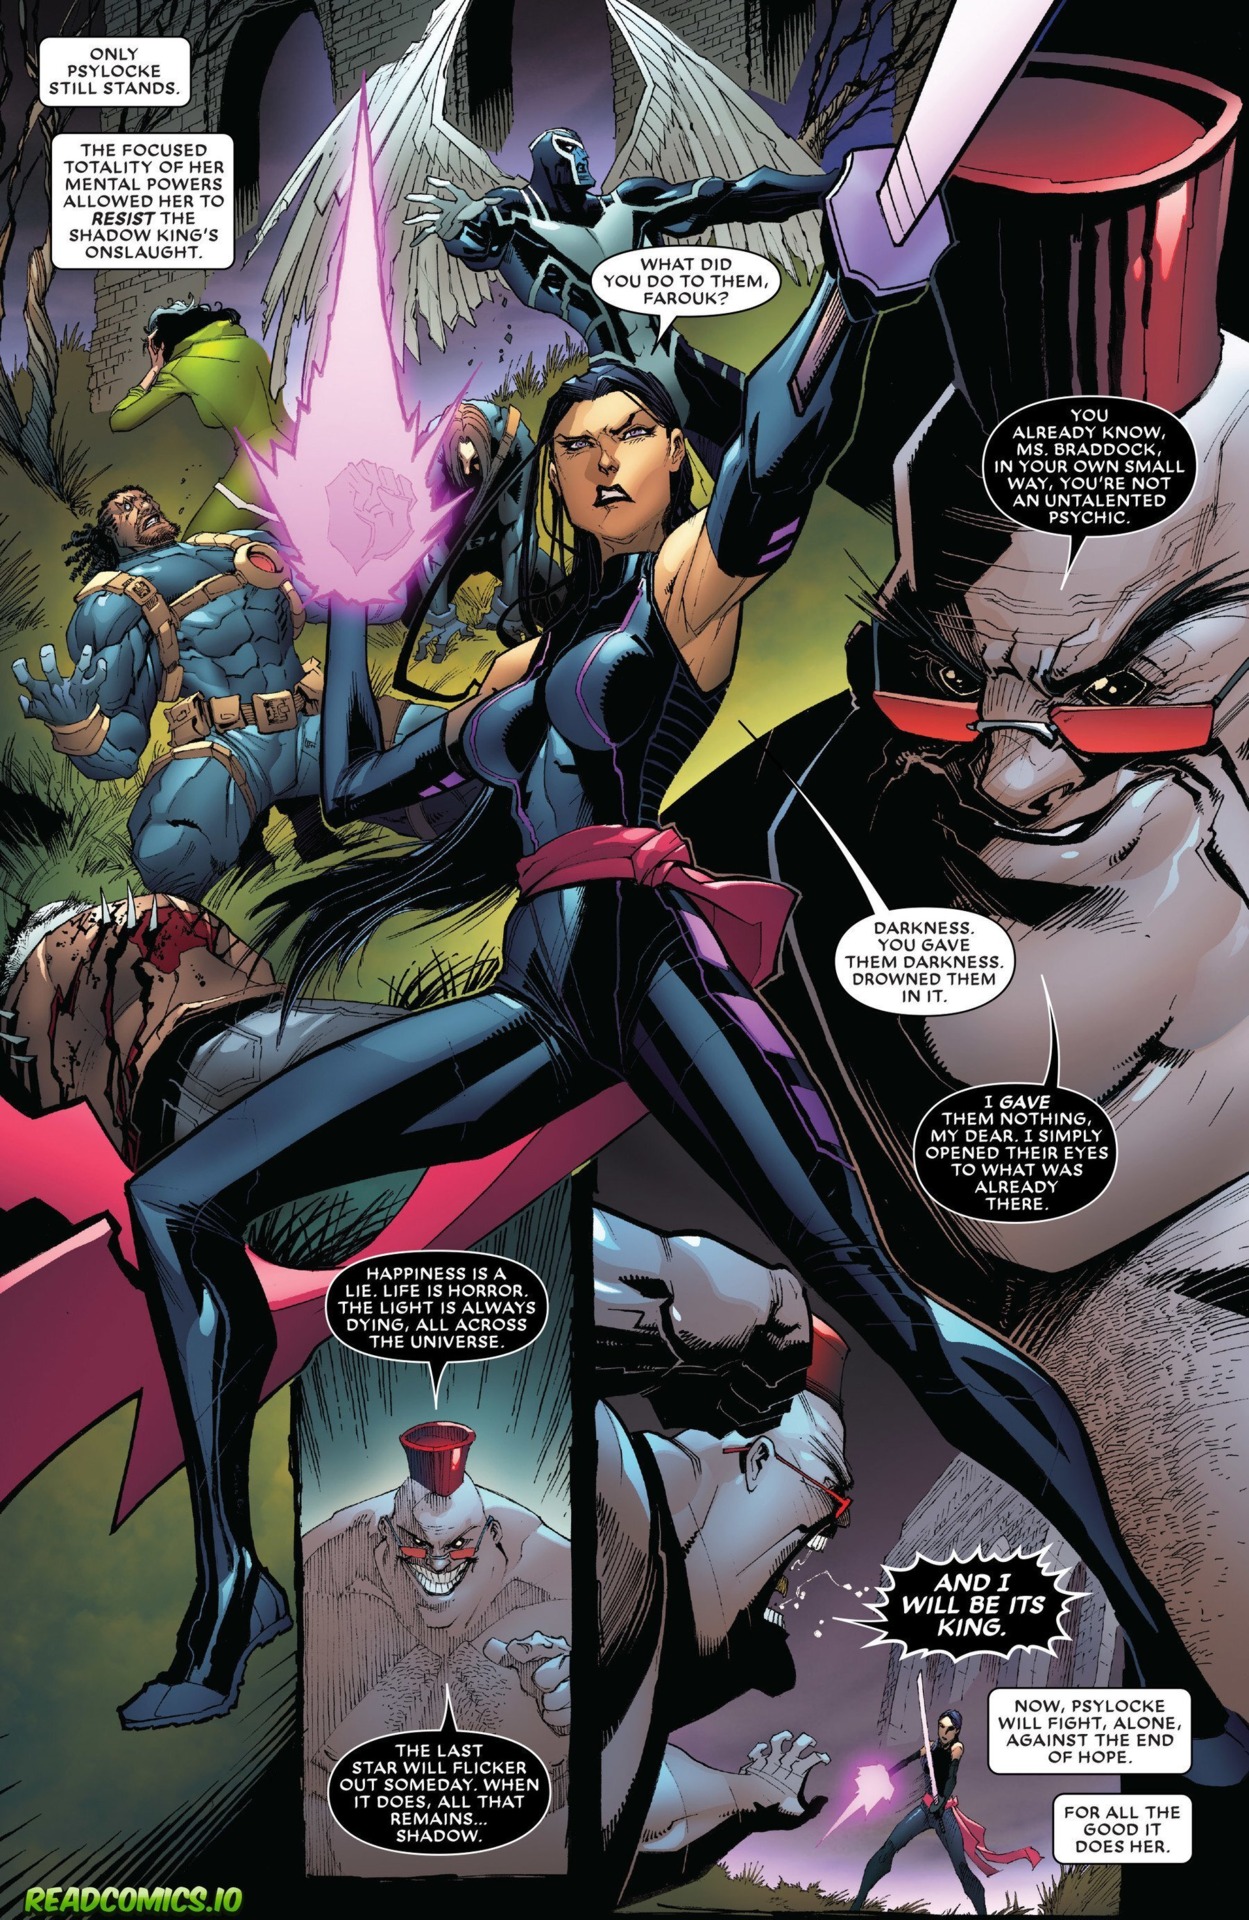 Psylocke's focused totality of her power, the same power that her psionic weapons are made of, protects Psylocke from an amped Shadow King's mental onslaught